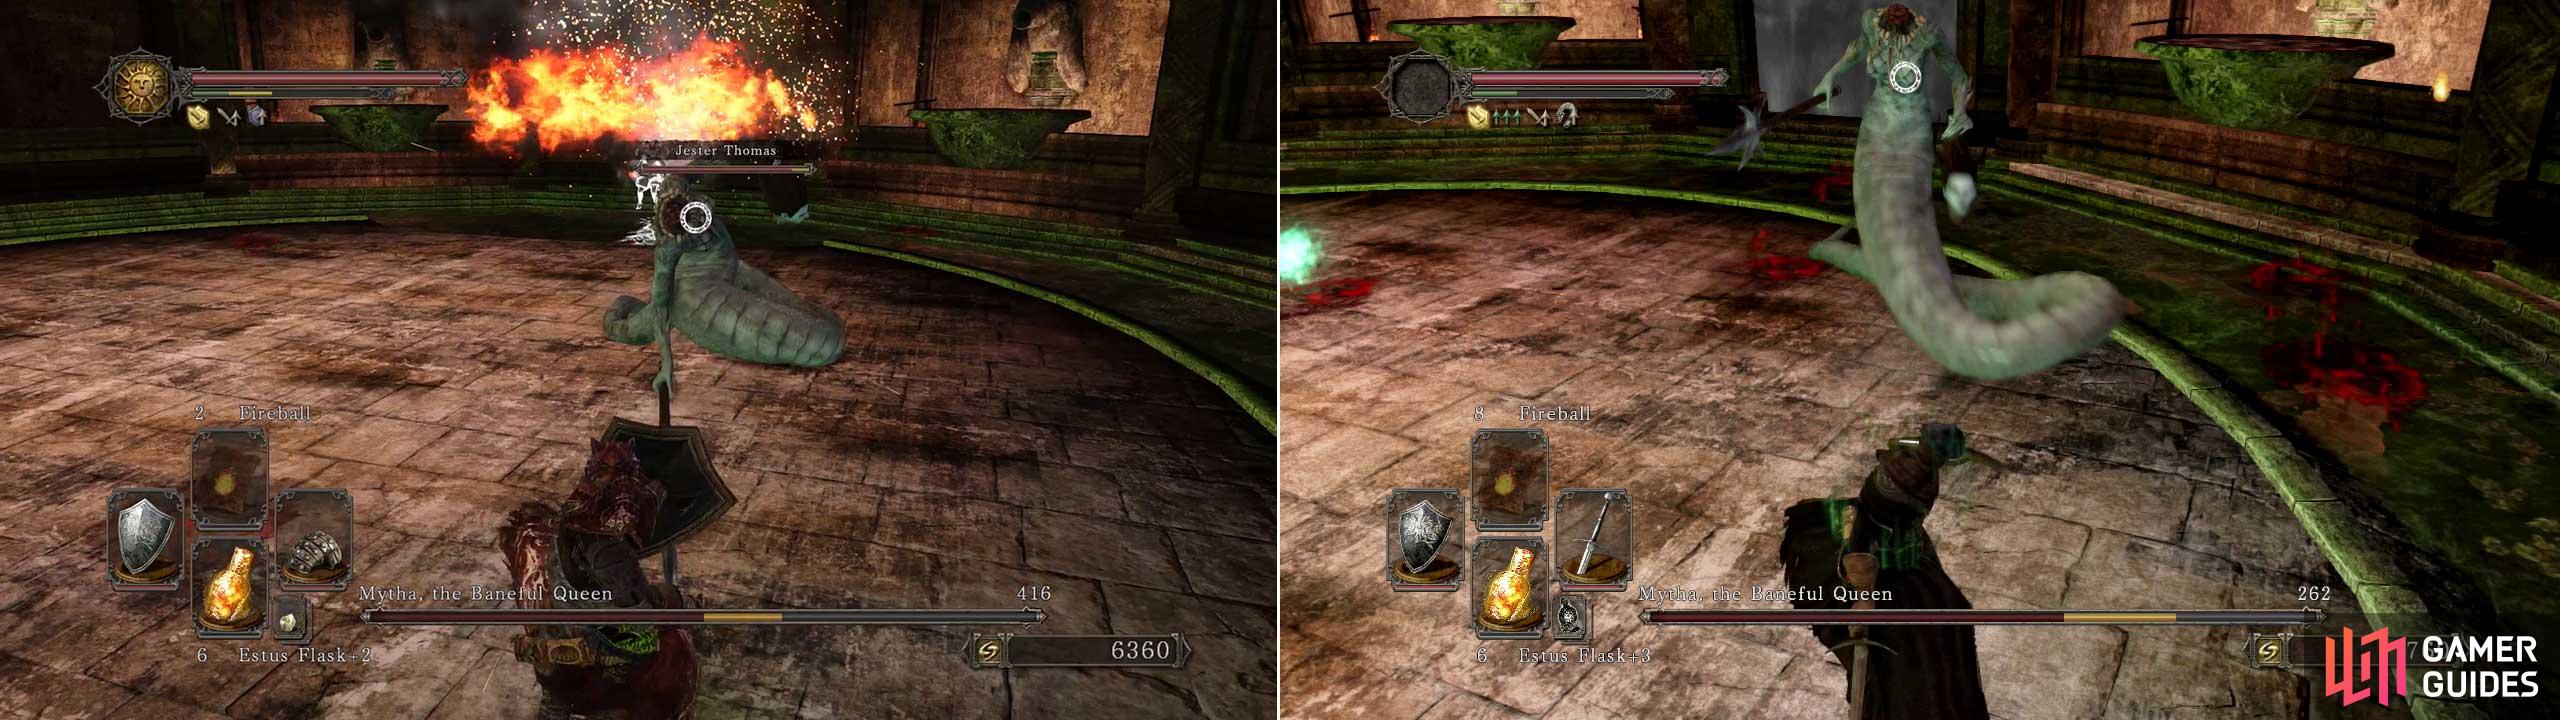 Jester does some SERIOUS damage to her, but it WILL remove most of the challenge for this fight if you don’t do it solo (left pic).